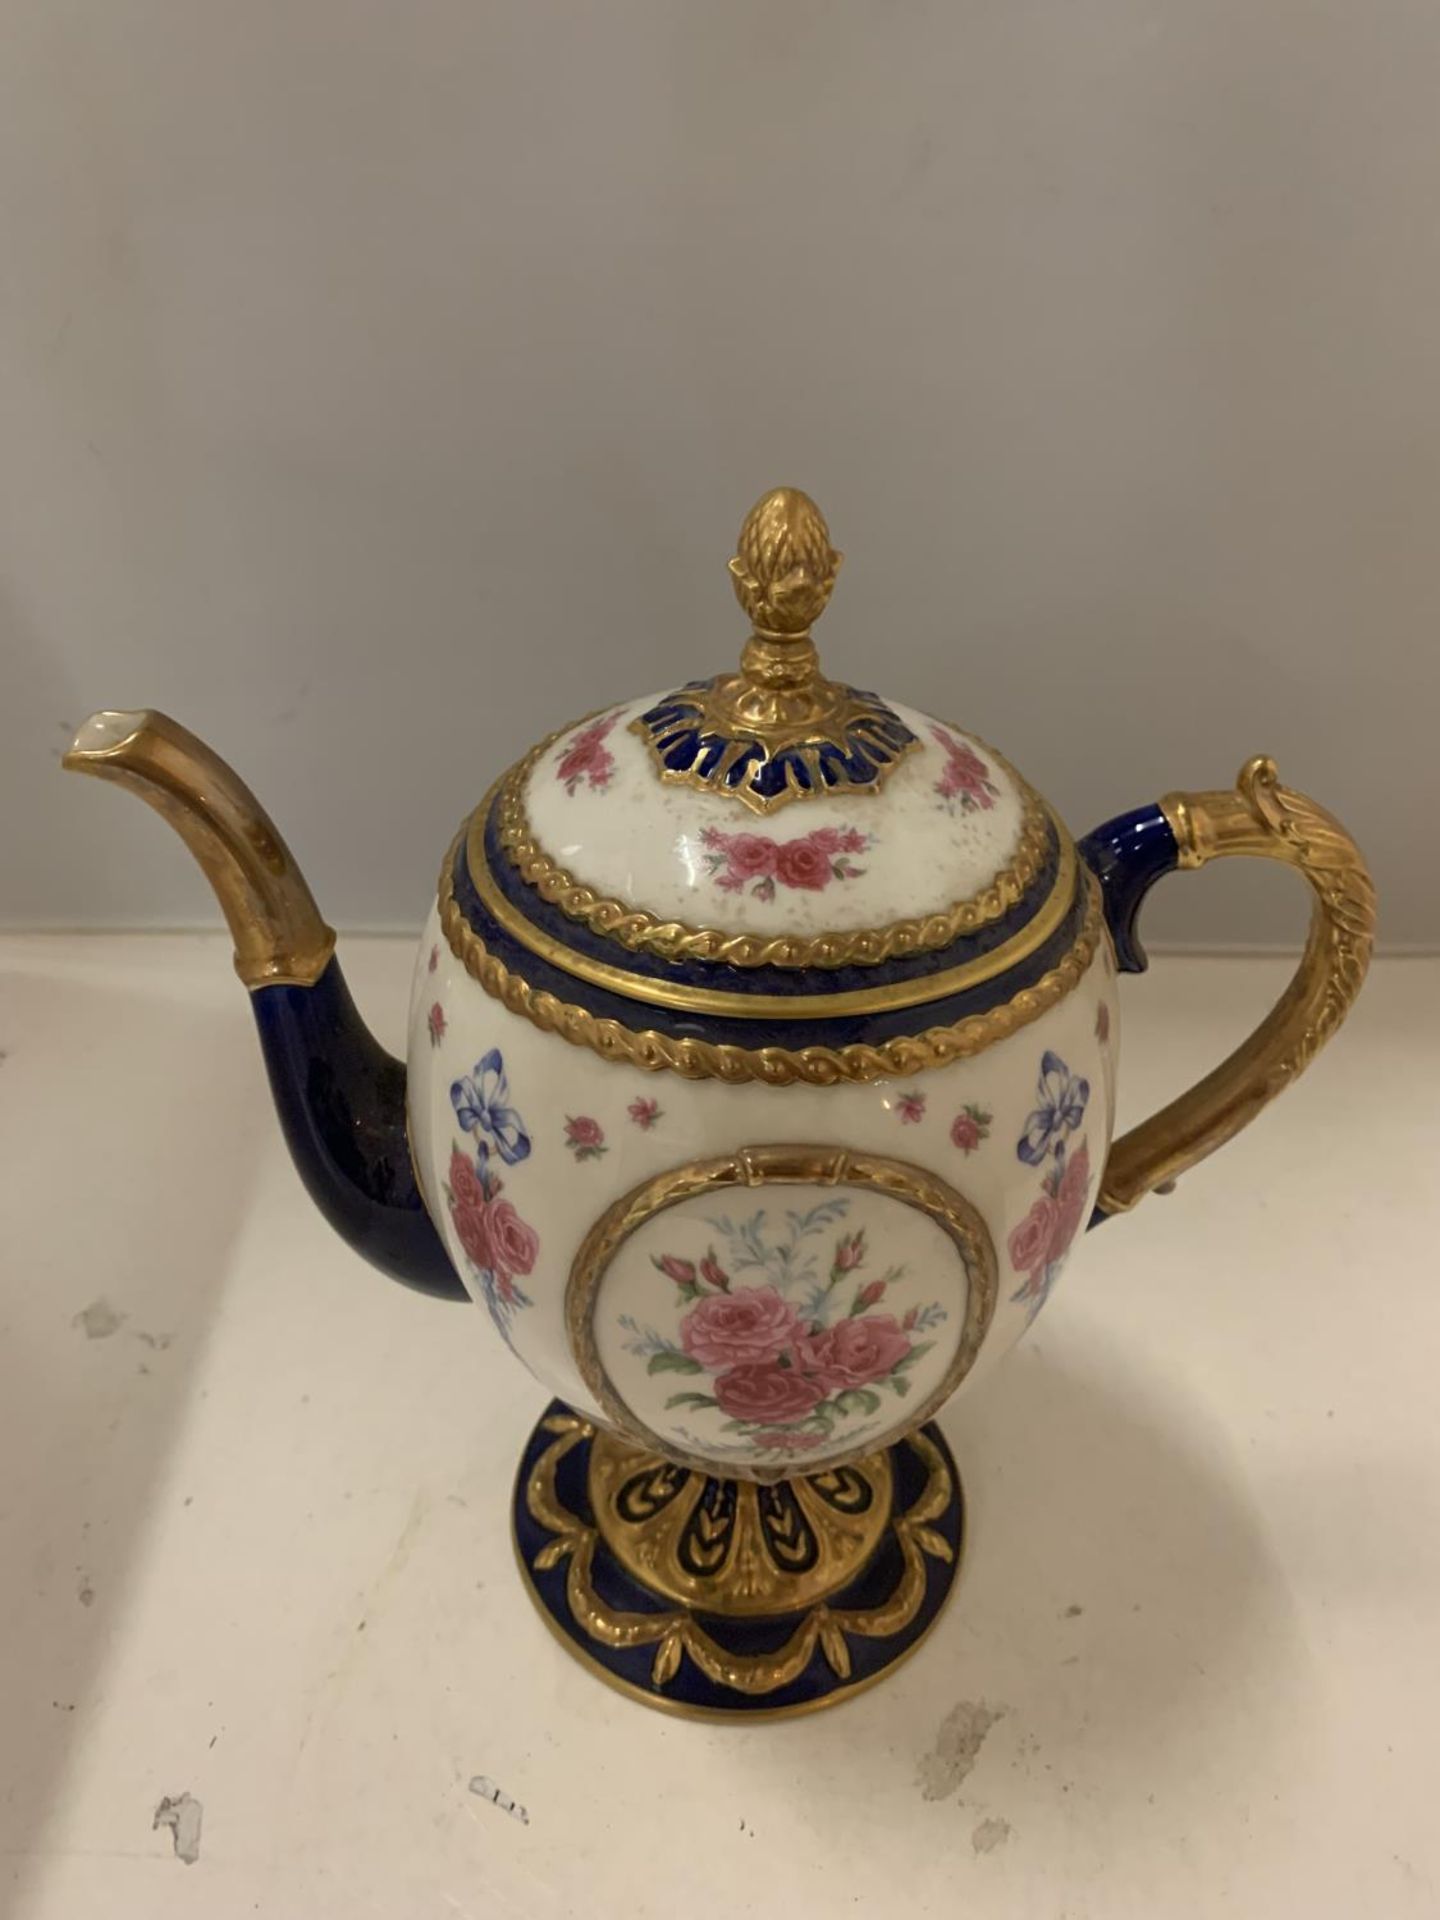 A FABERGE IMPERIAL TEAPOT WITH CERTIFICATE OF AUTHENTICITY - Image 2 of 7